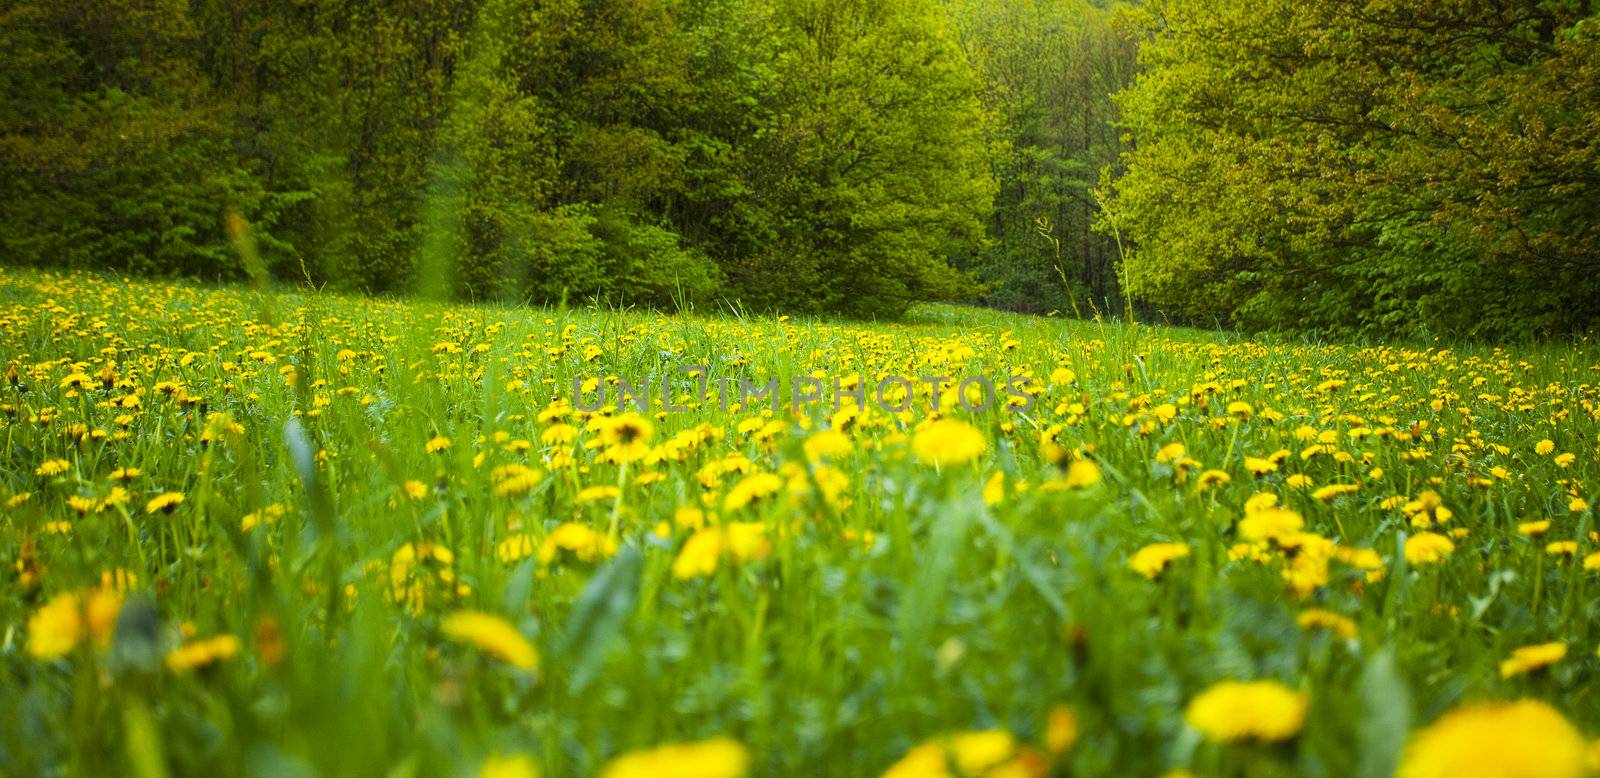 background field of dandelions in the woods by jannyjus